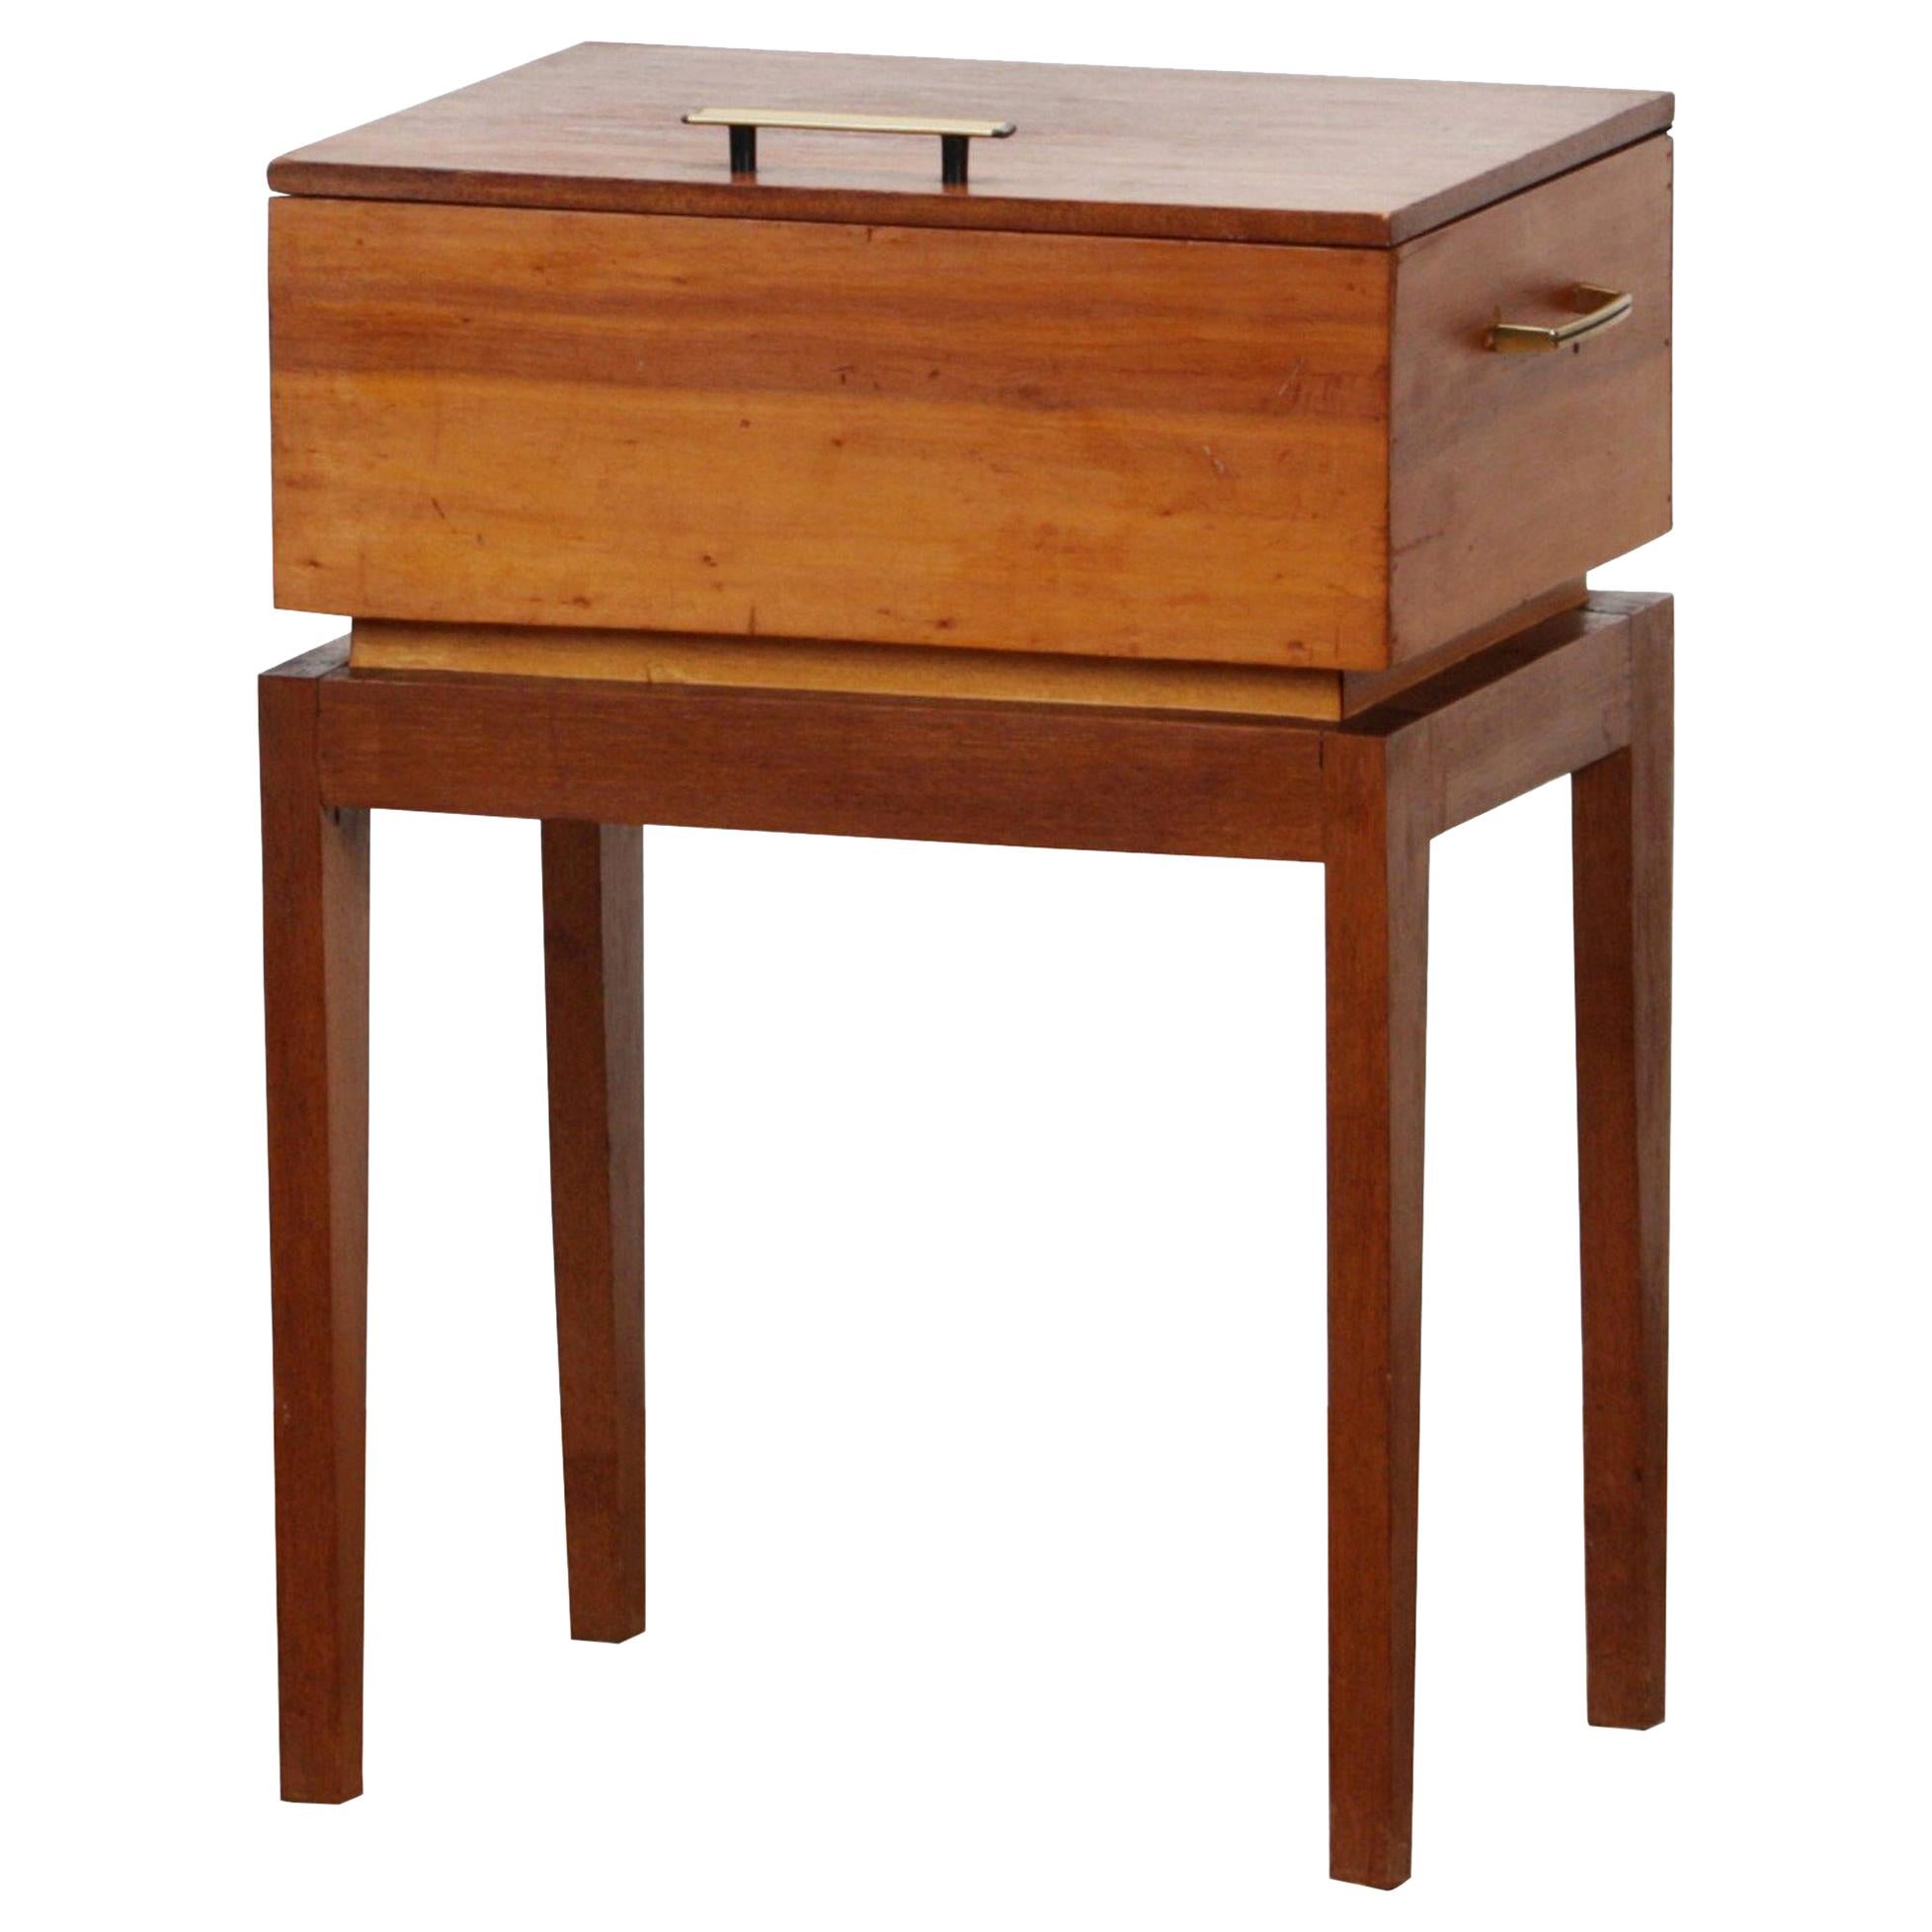 1950s Teak and Pine Sewing Side Table